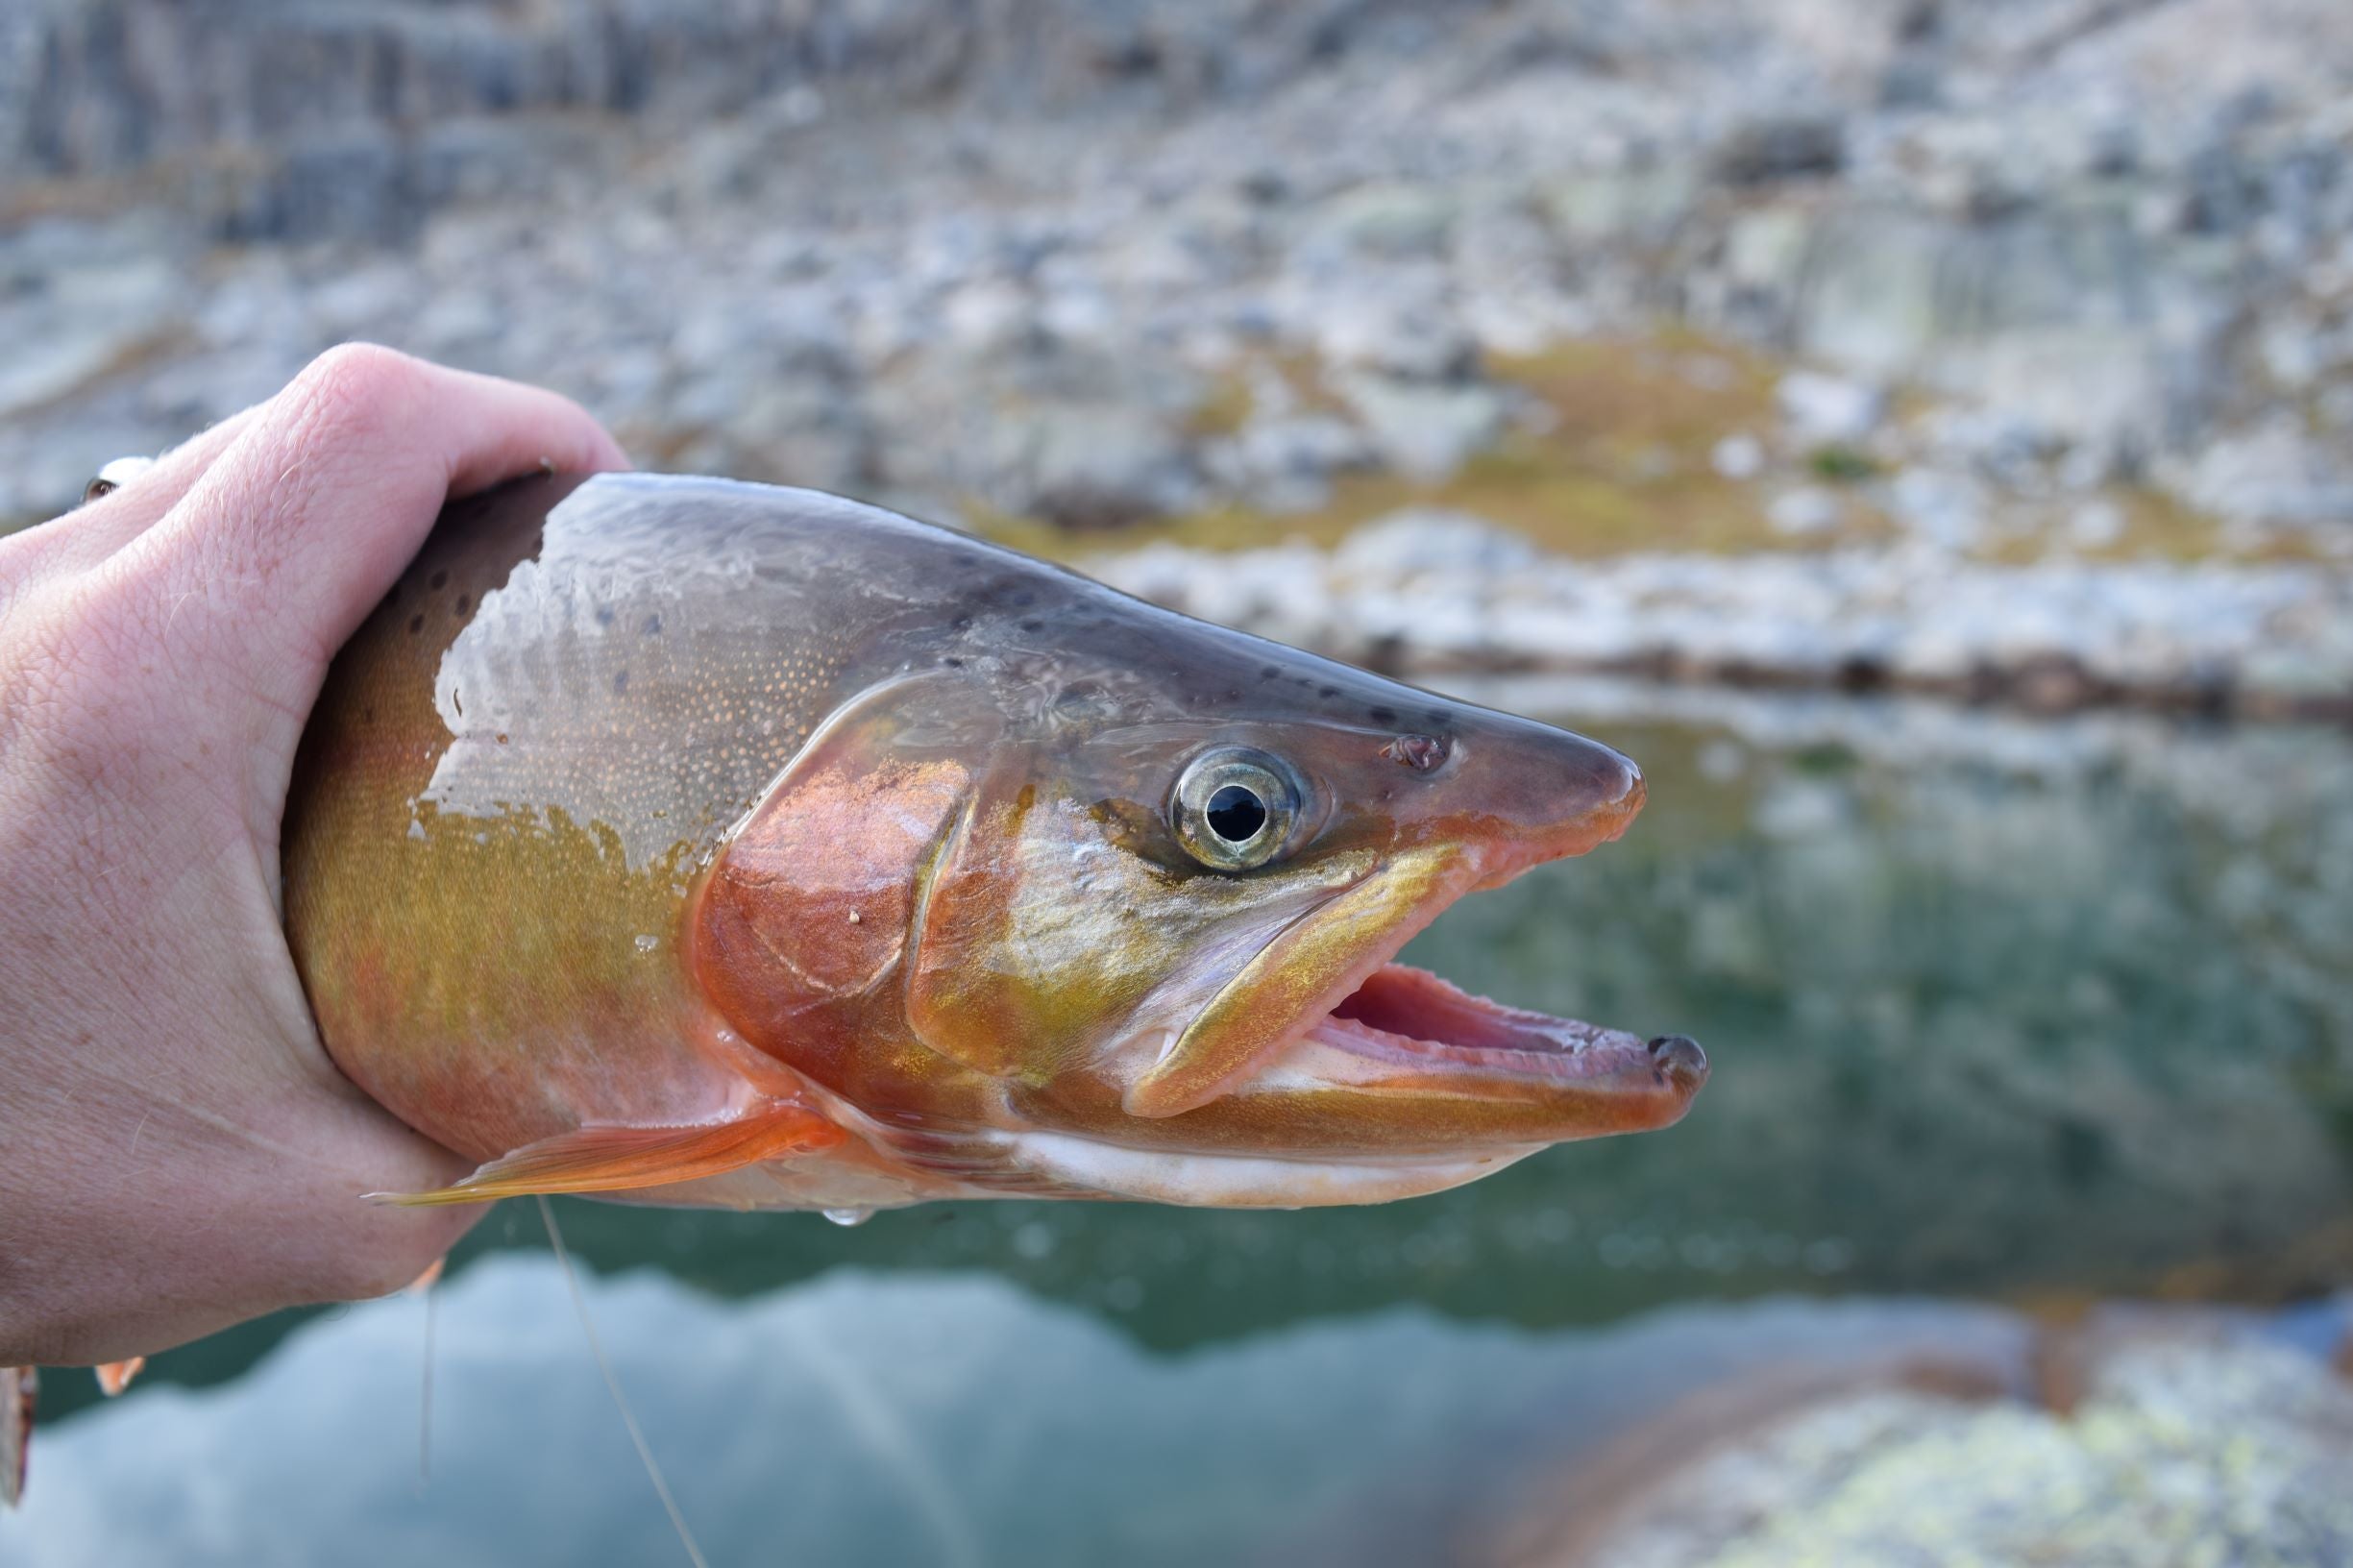 Wyoming Golden Trout